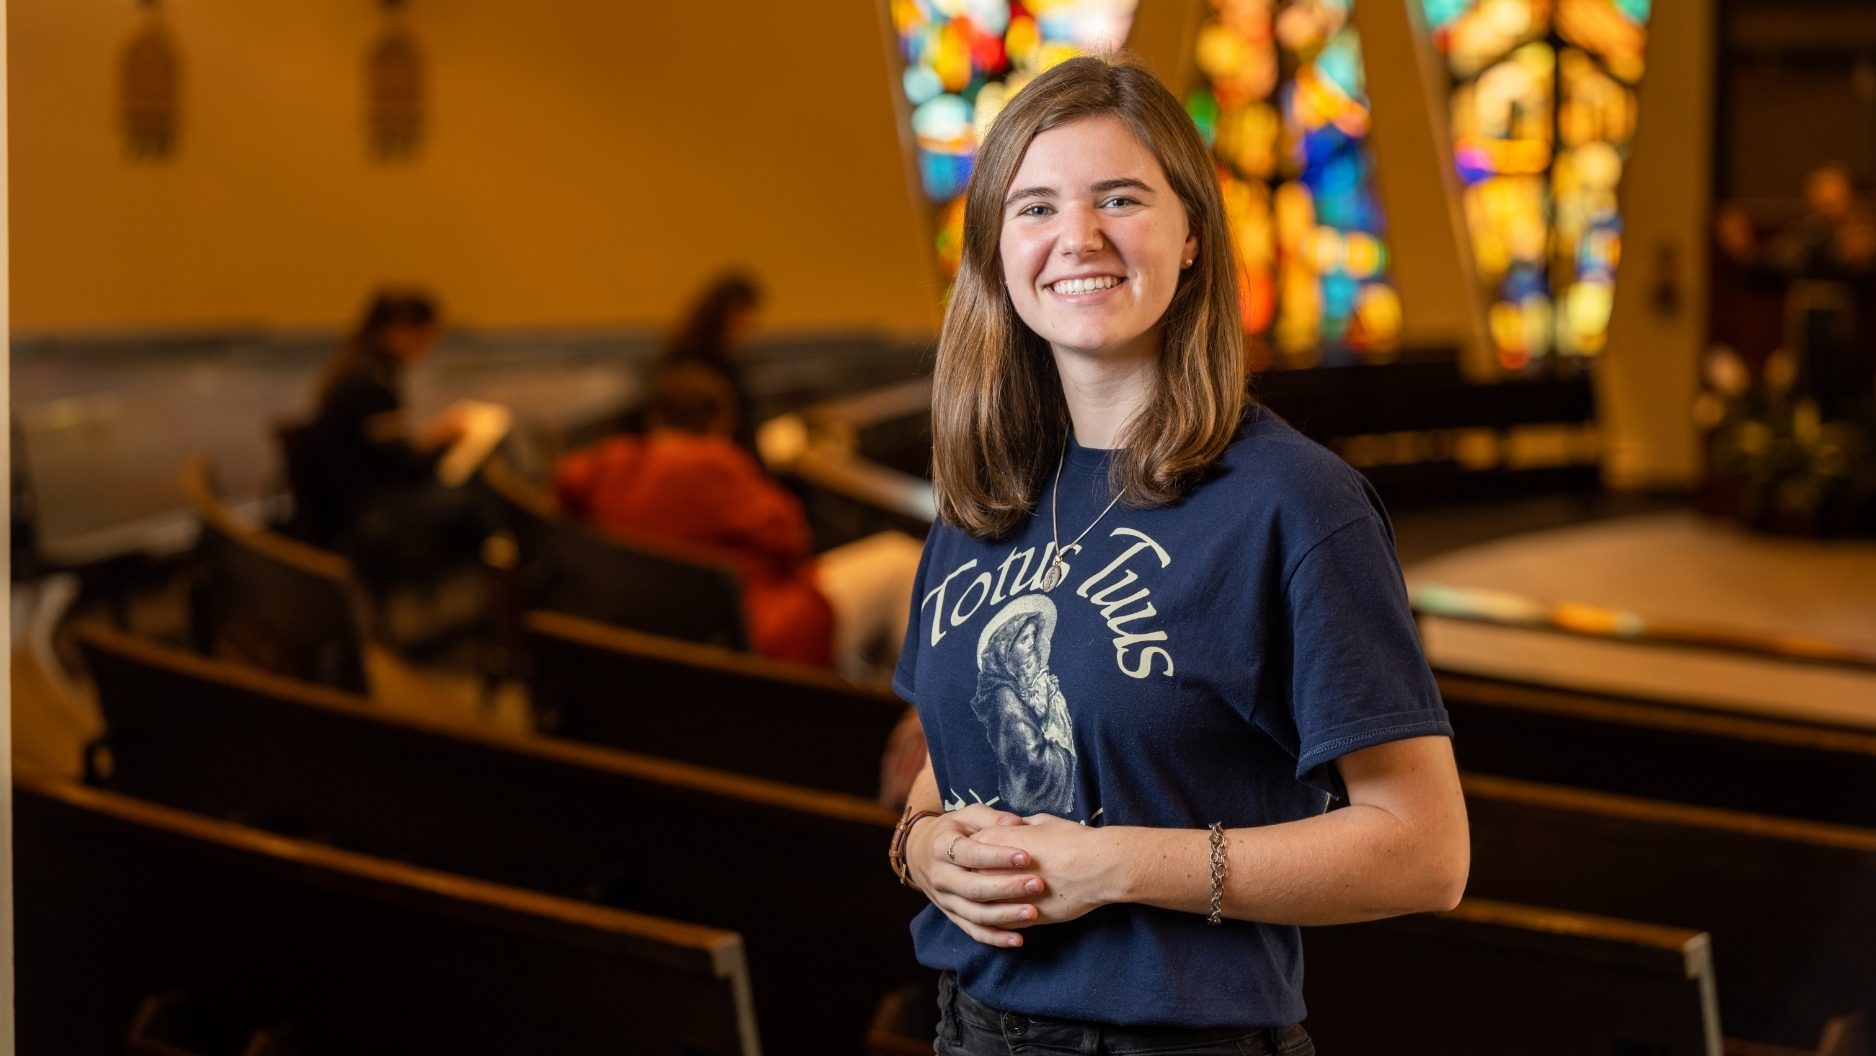 student with household shirt smiling in the Christ the King chapel